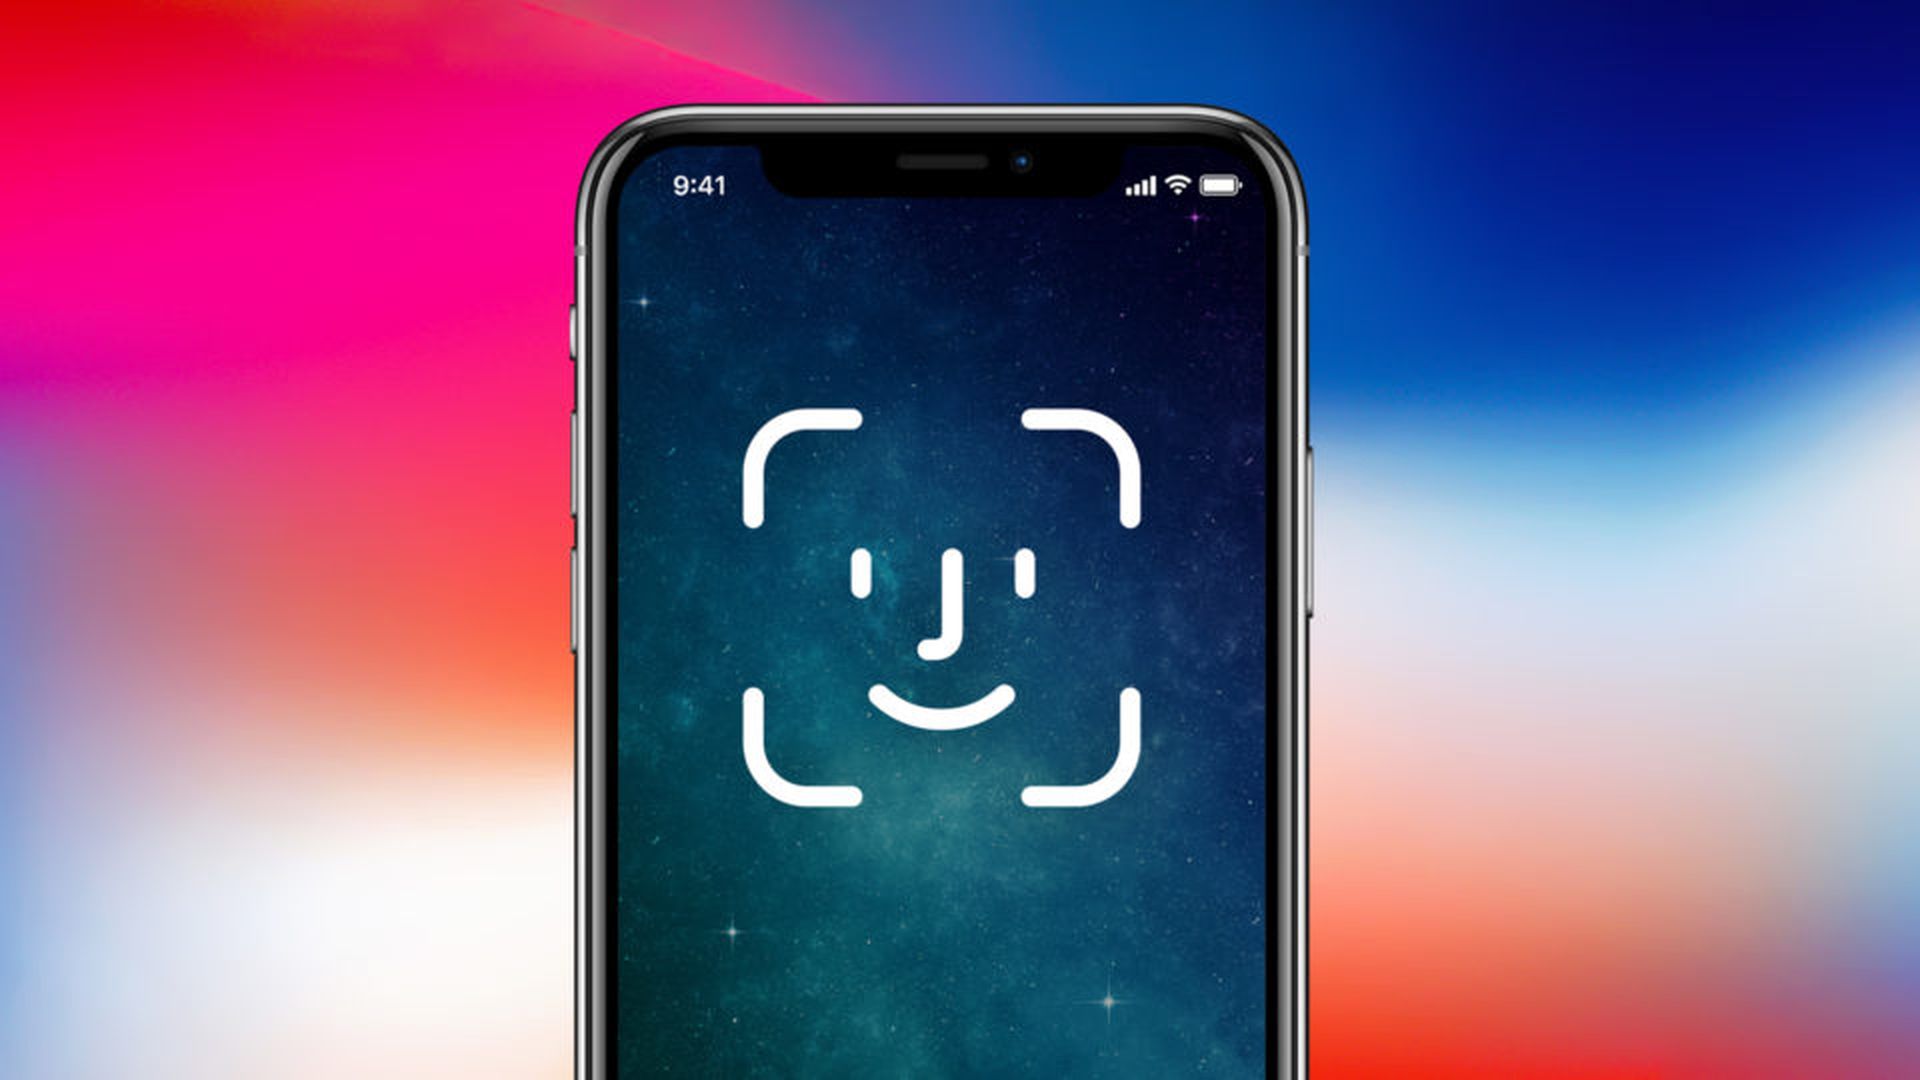 In this article, we are going to be going over how to add another Face ID to your iPhone, so you can add another person's face to unlock your phone.